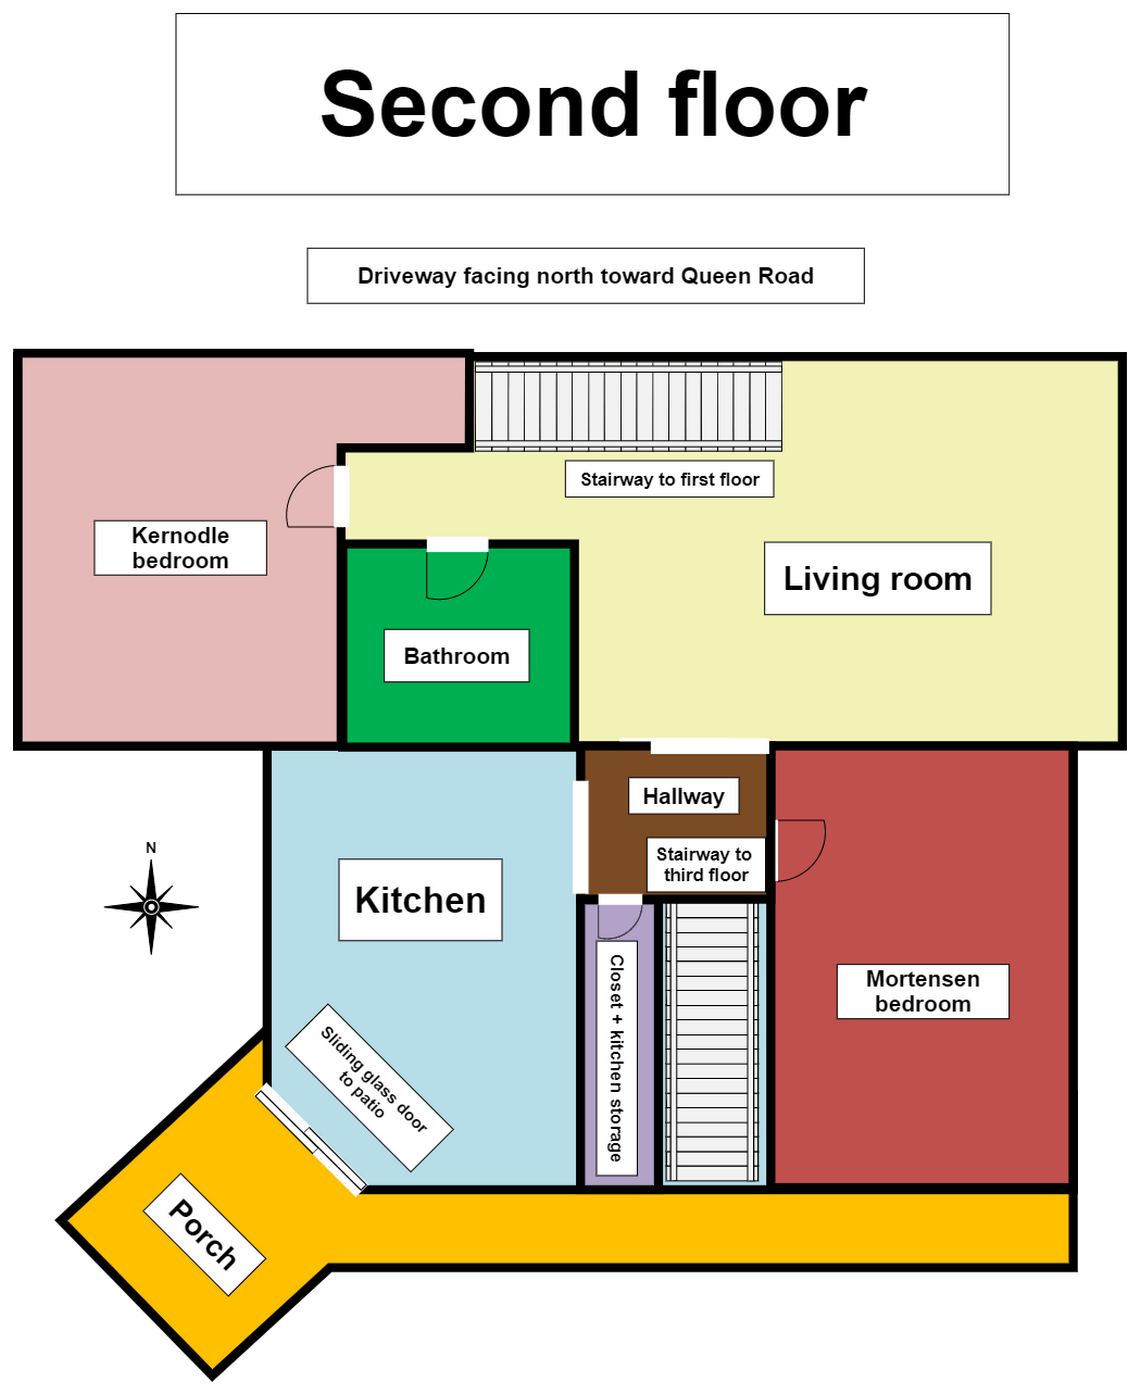 An updated layout of the second floor of the Moscow home where the homicides took place.